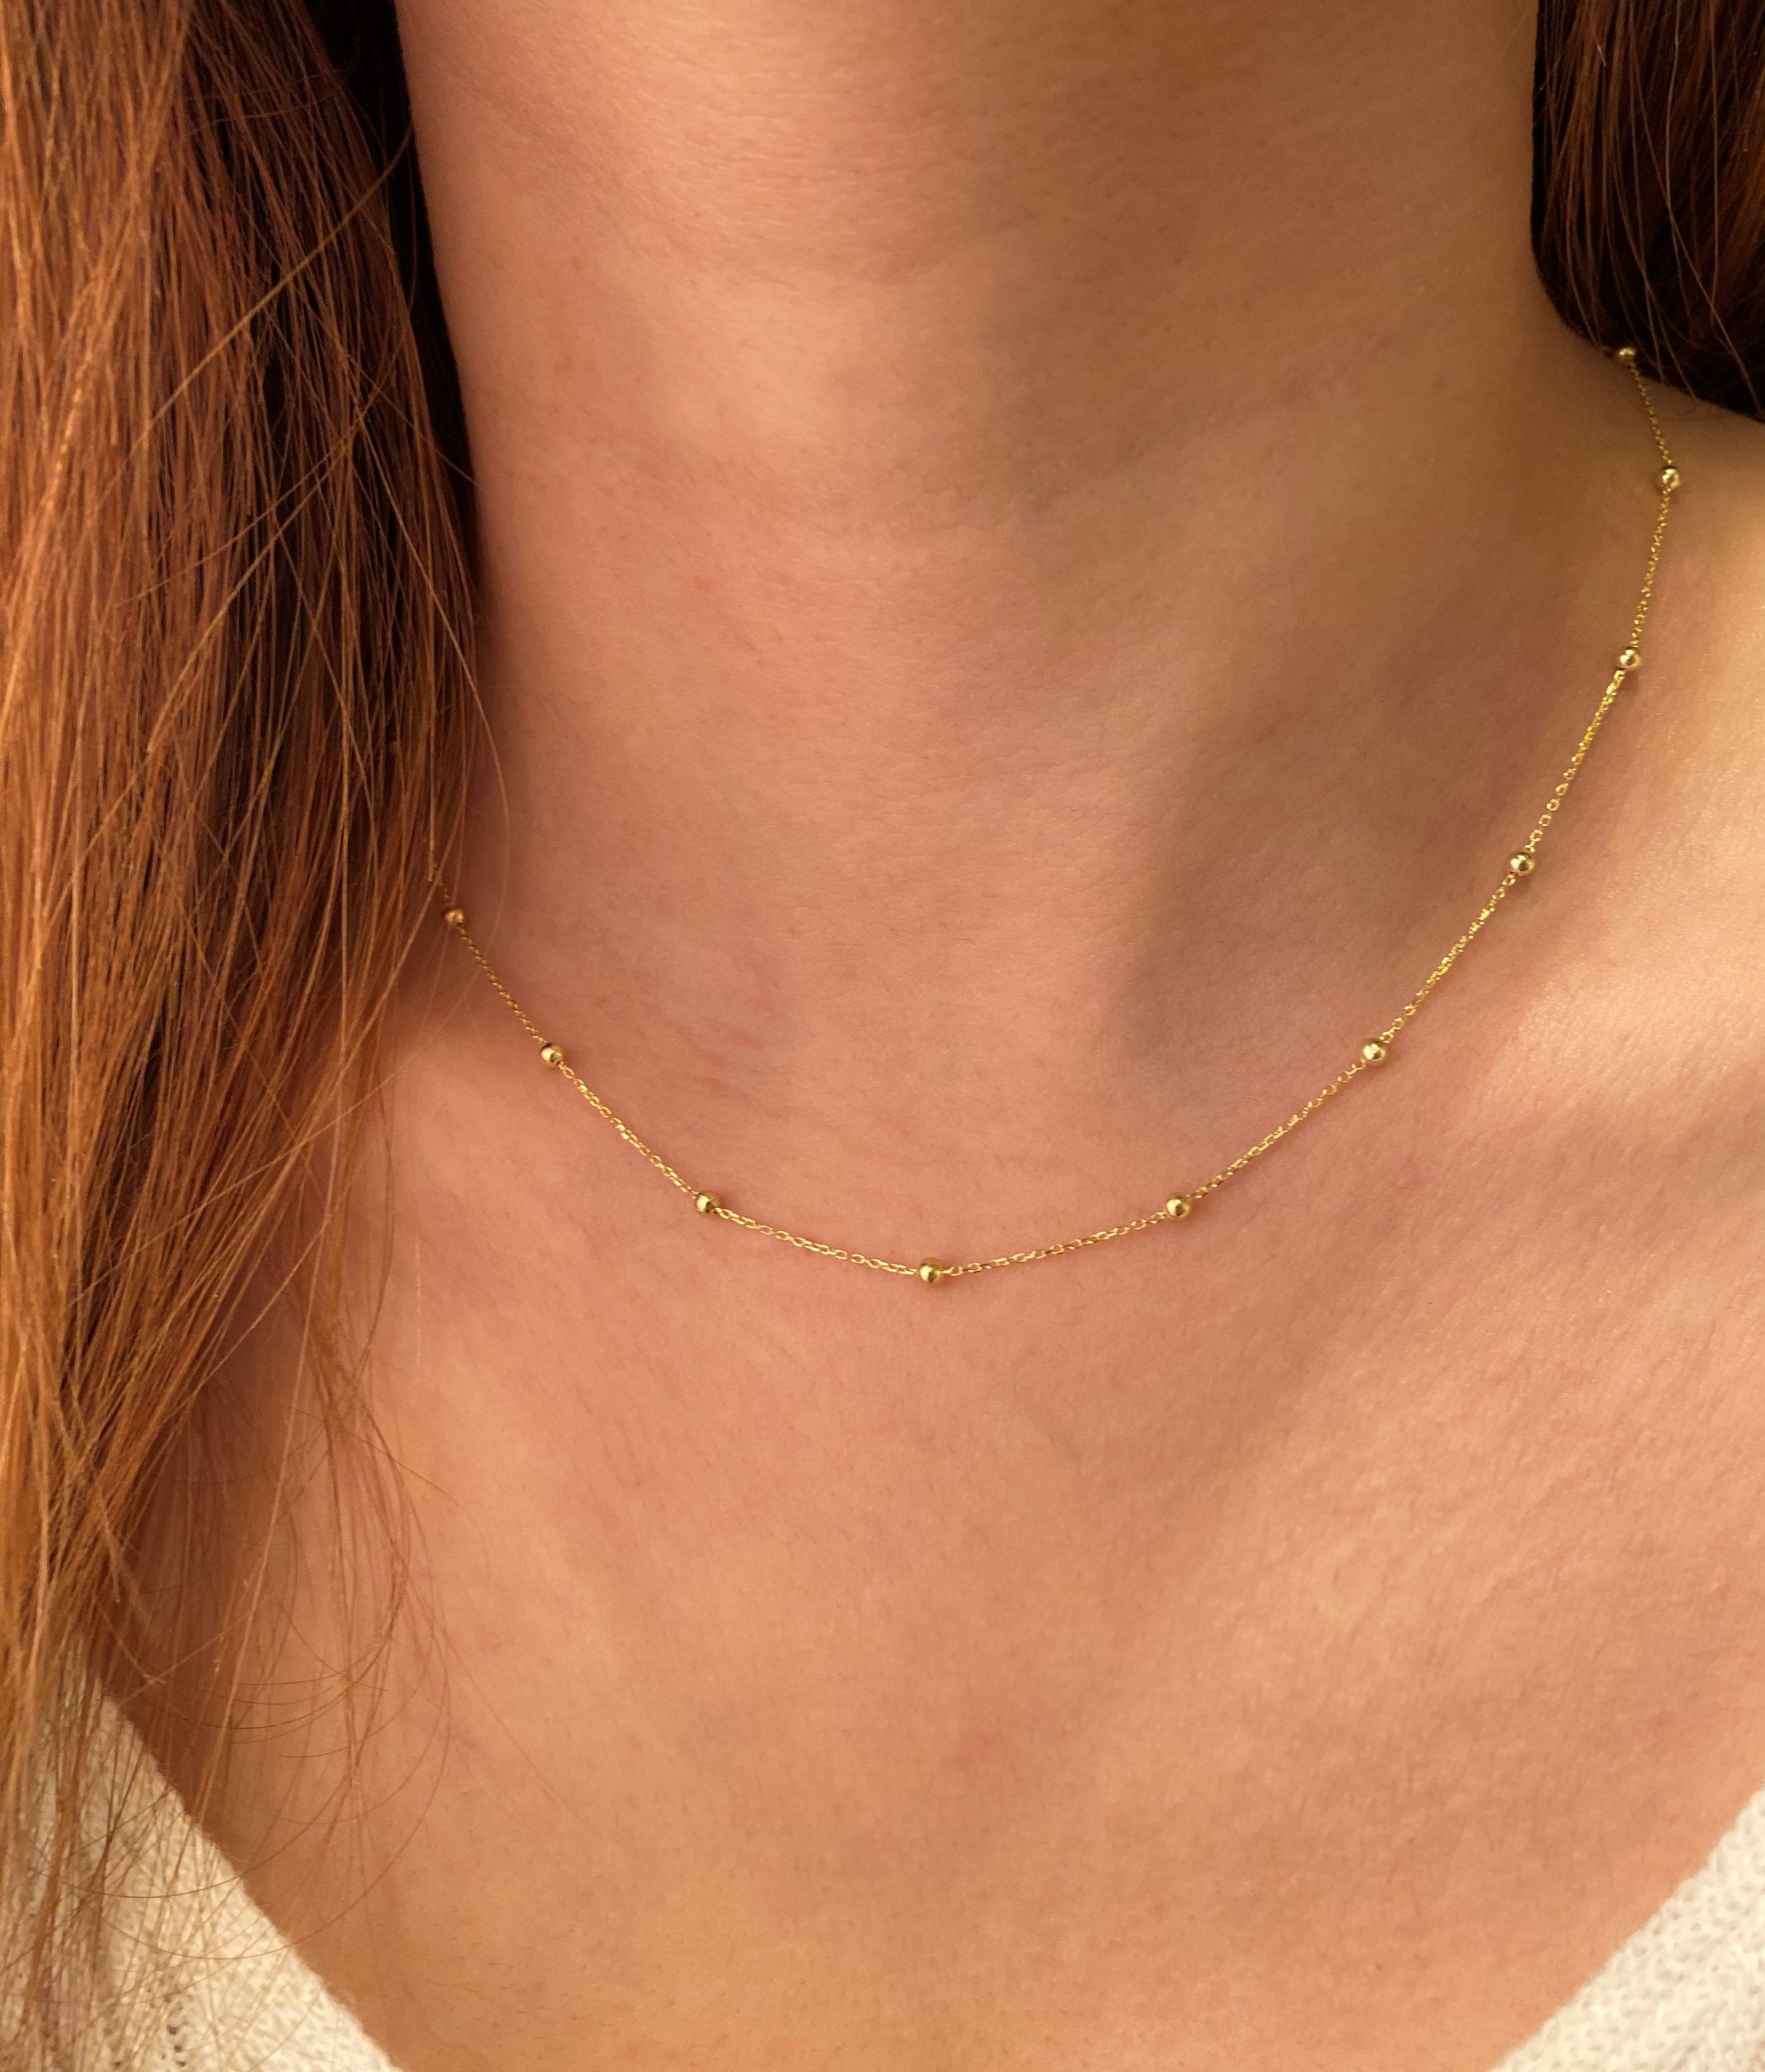 14K Gold Satellite Necklace, Beaded Necklace, Ball Chain Choker, Dainty Bead Chain Necklace, Station Necklace, Layering Gold Chain Necklace